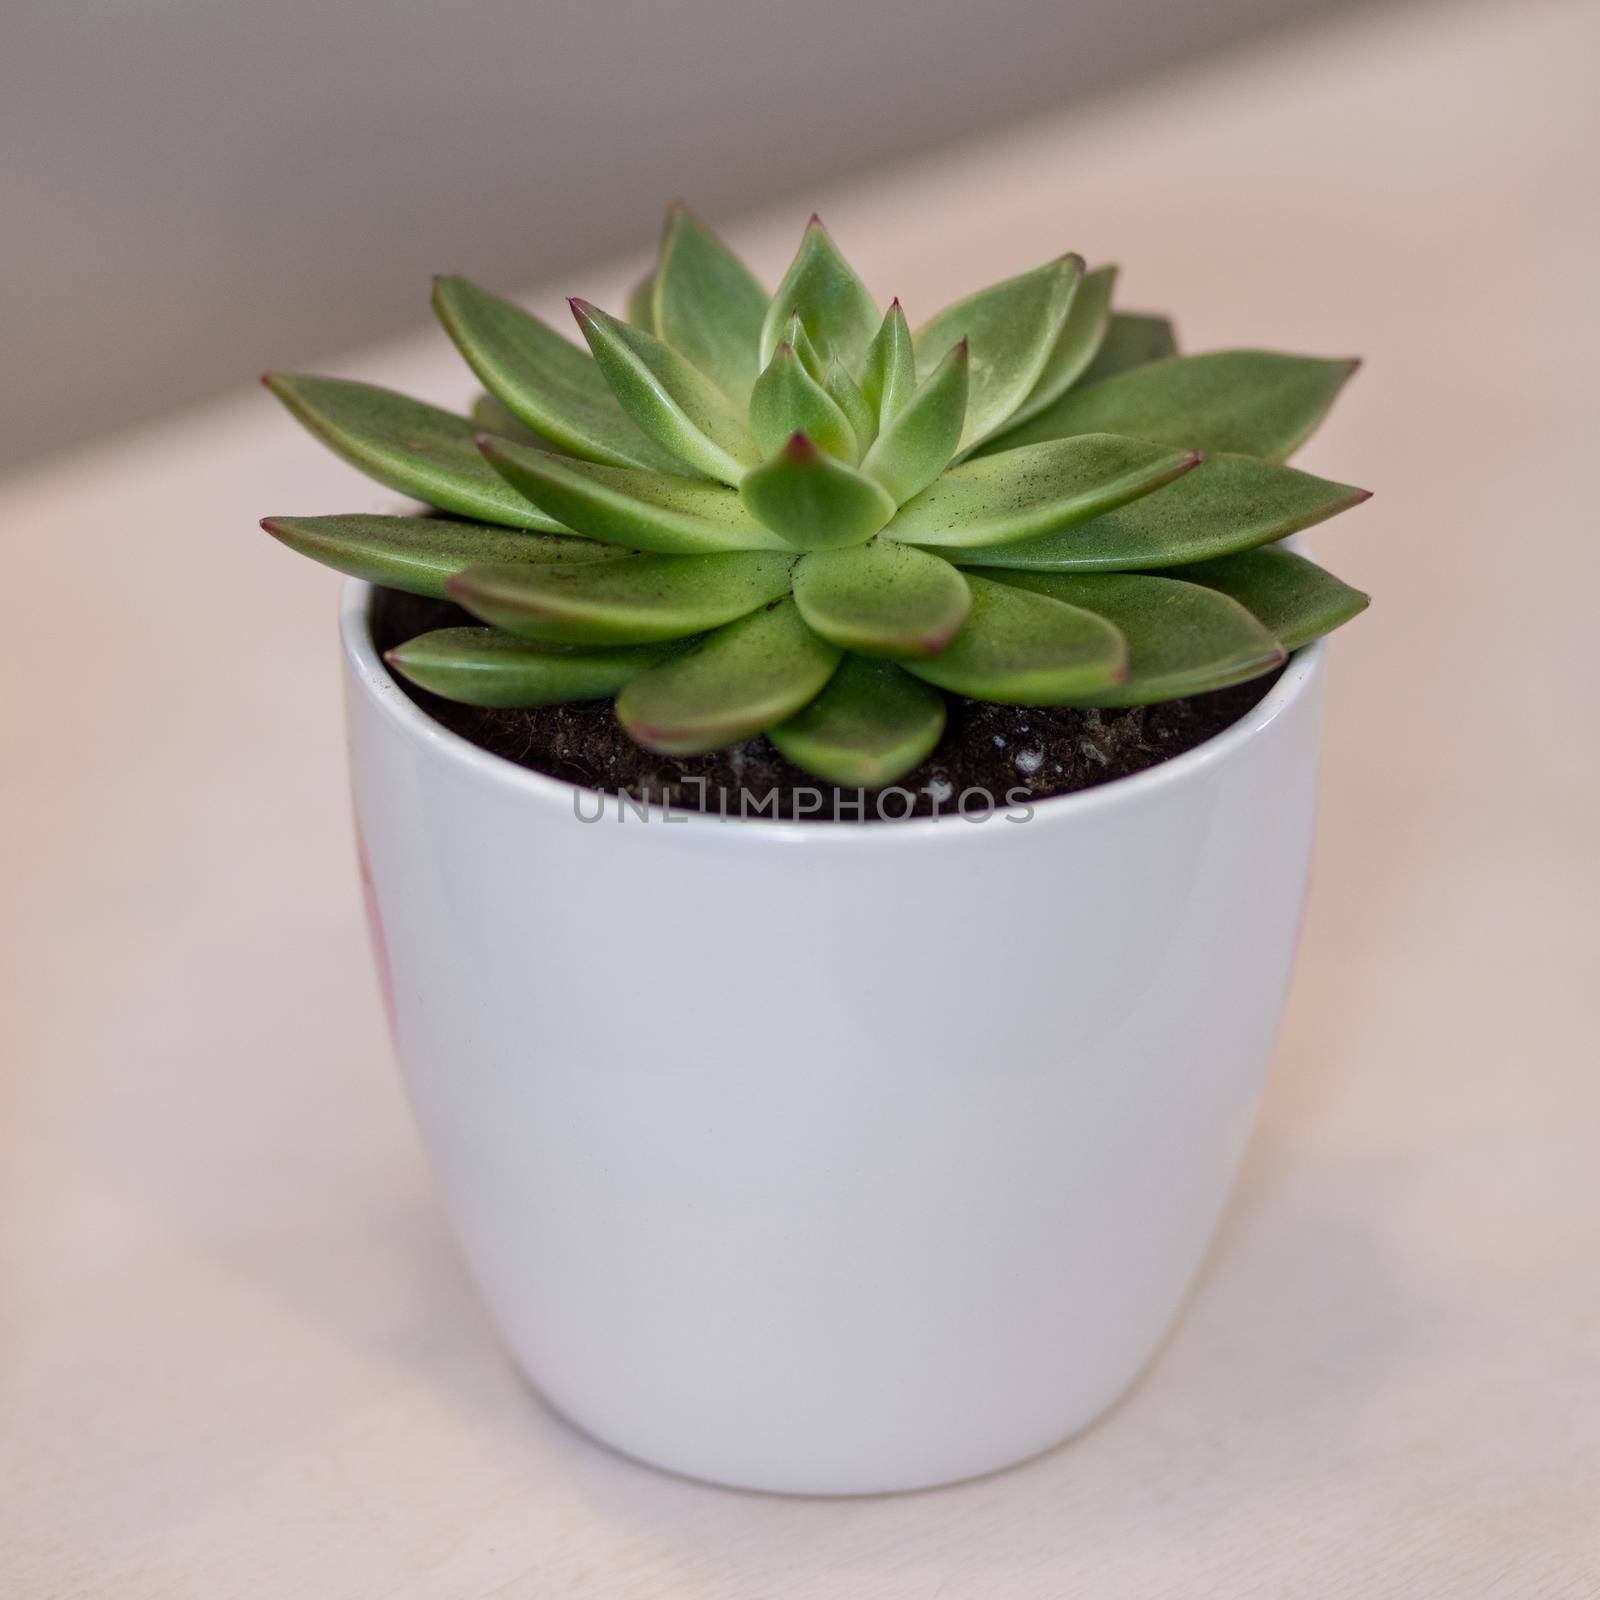 Succulent in the white pot by ferhad